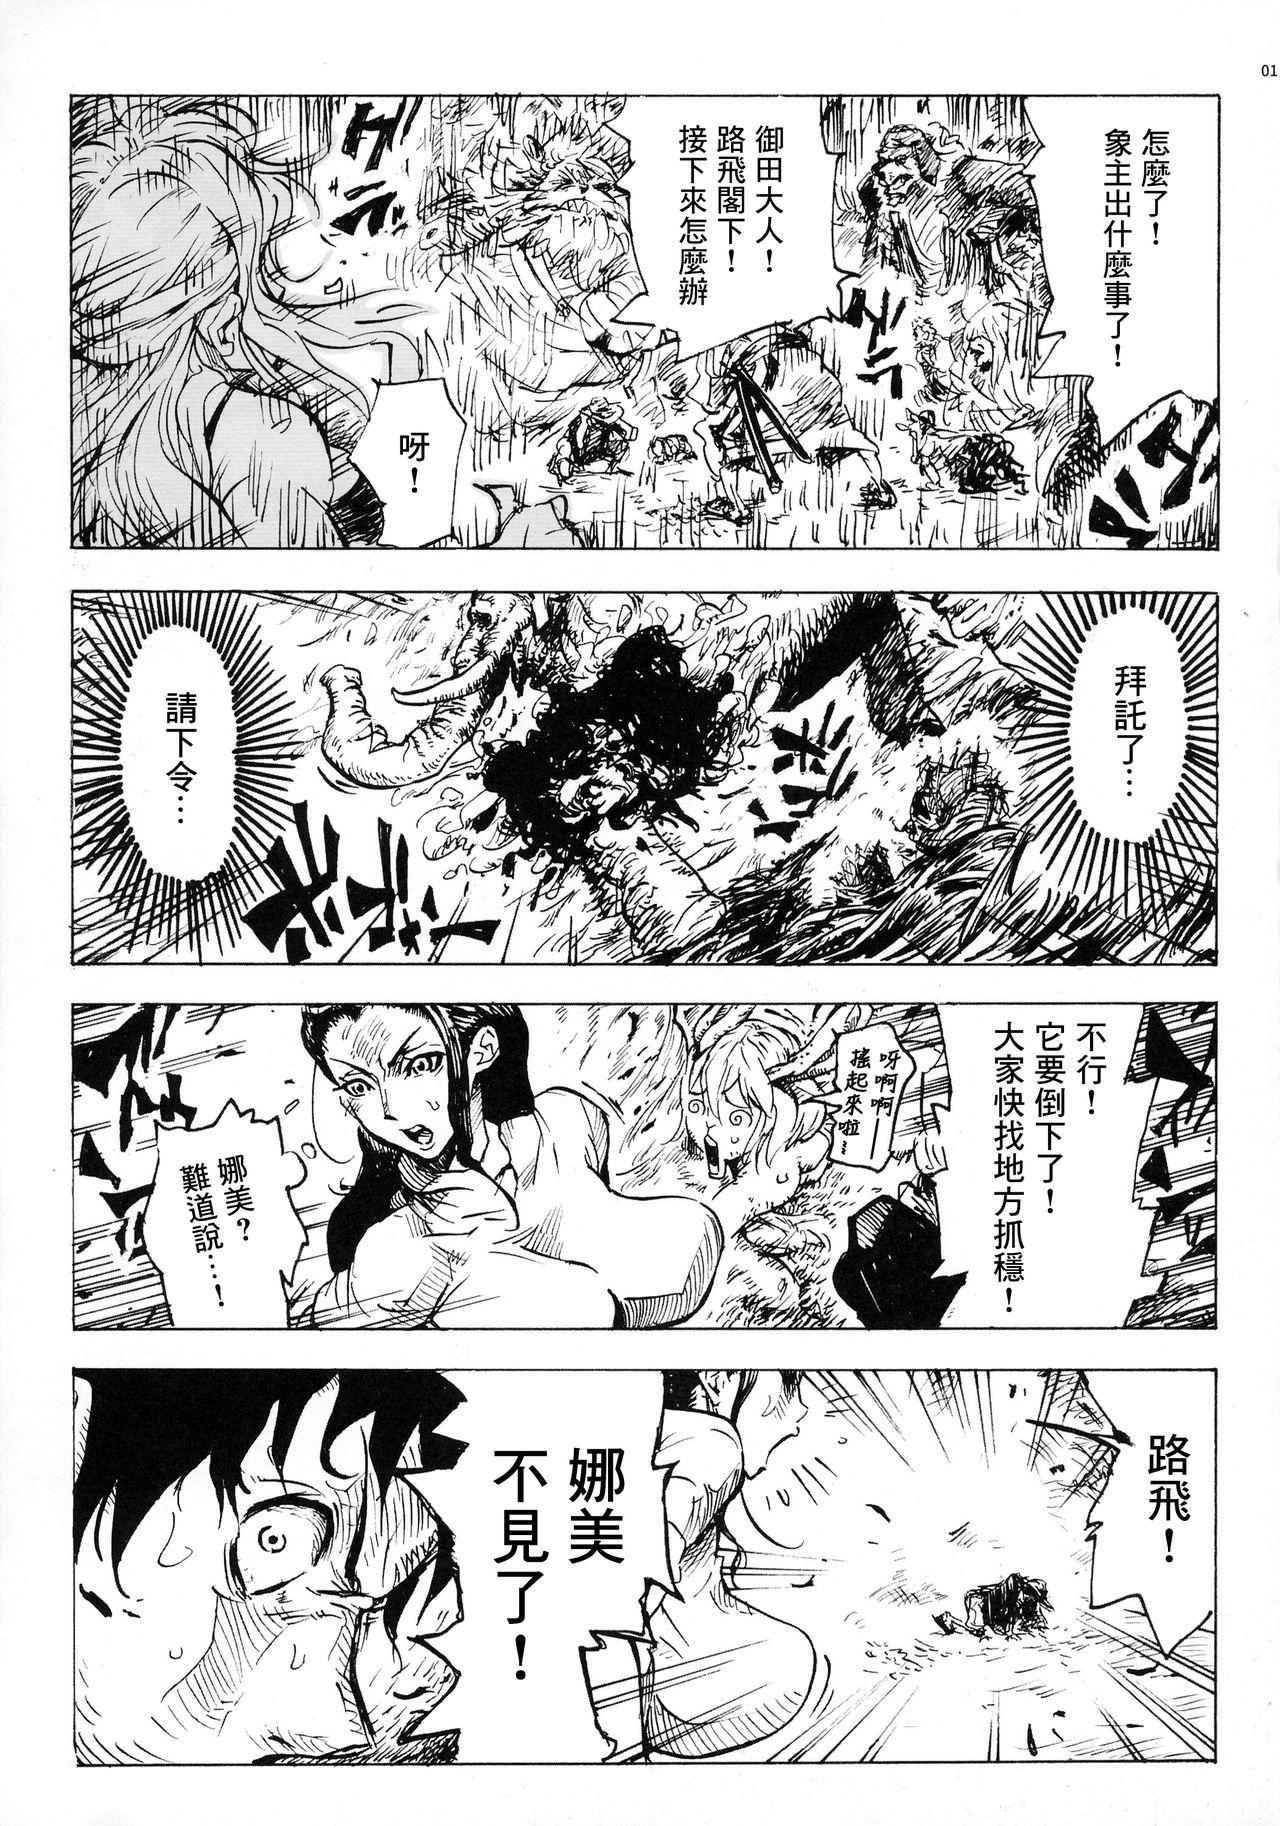 Stepfamily P.O.M Another Episode "J.A.C.K" - One piece Arabe - Page 4